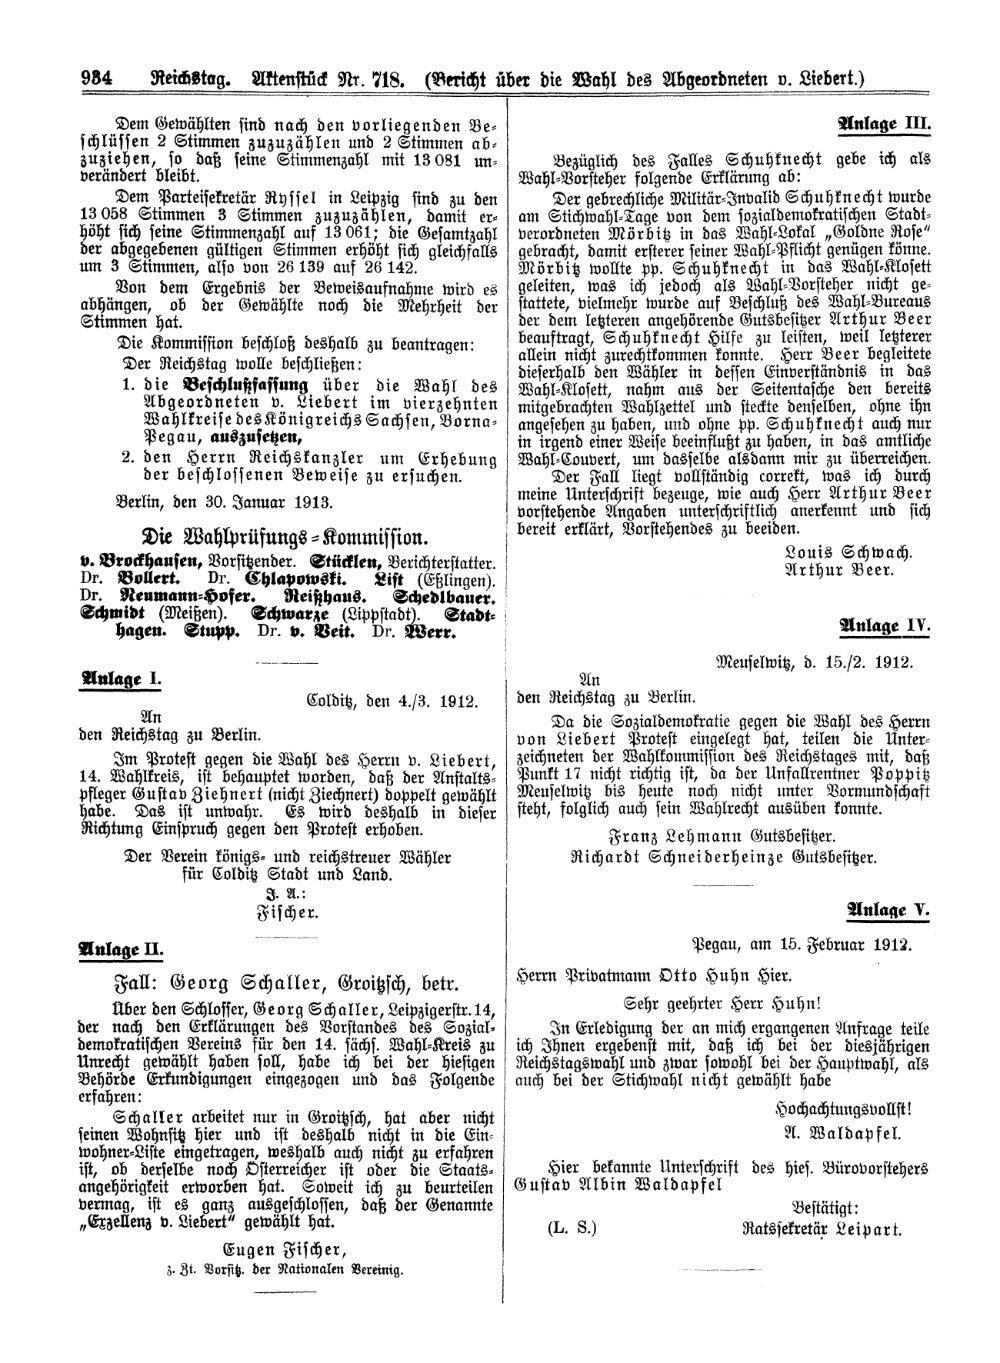 Scan of page 934